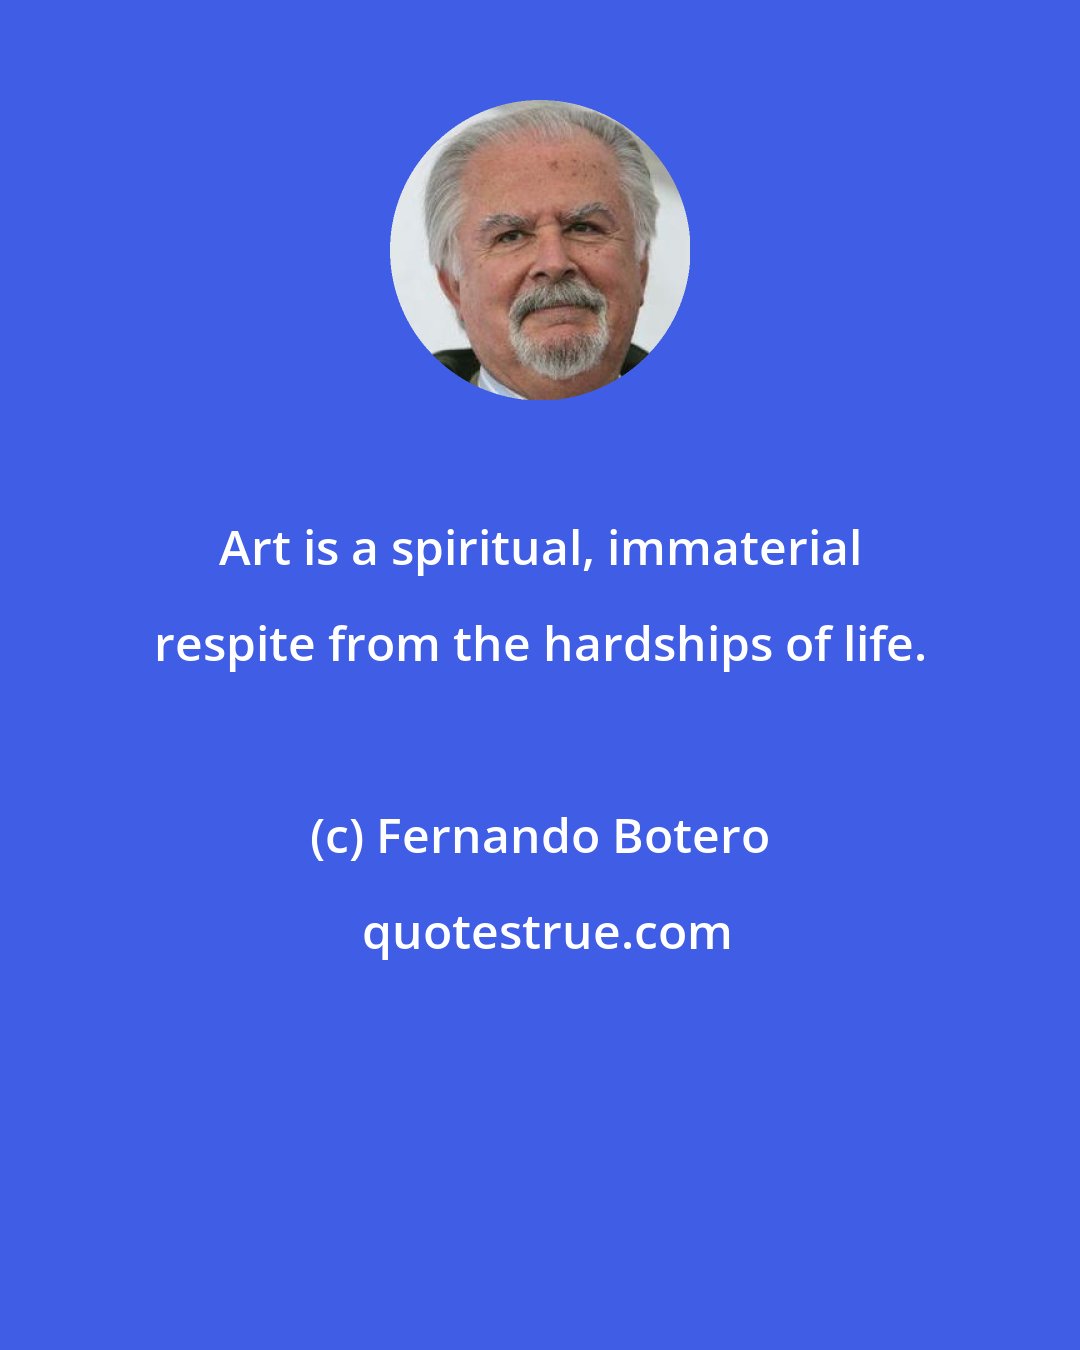 Fernando Botero: Art is a spiritual, immaterial respite from the hardships of life.